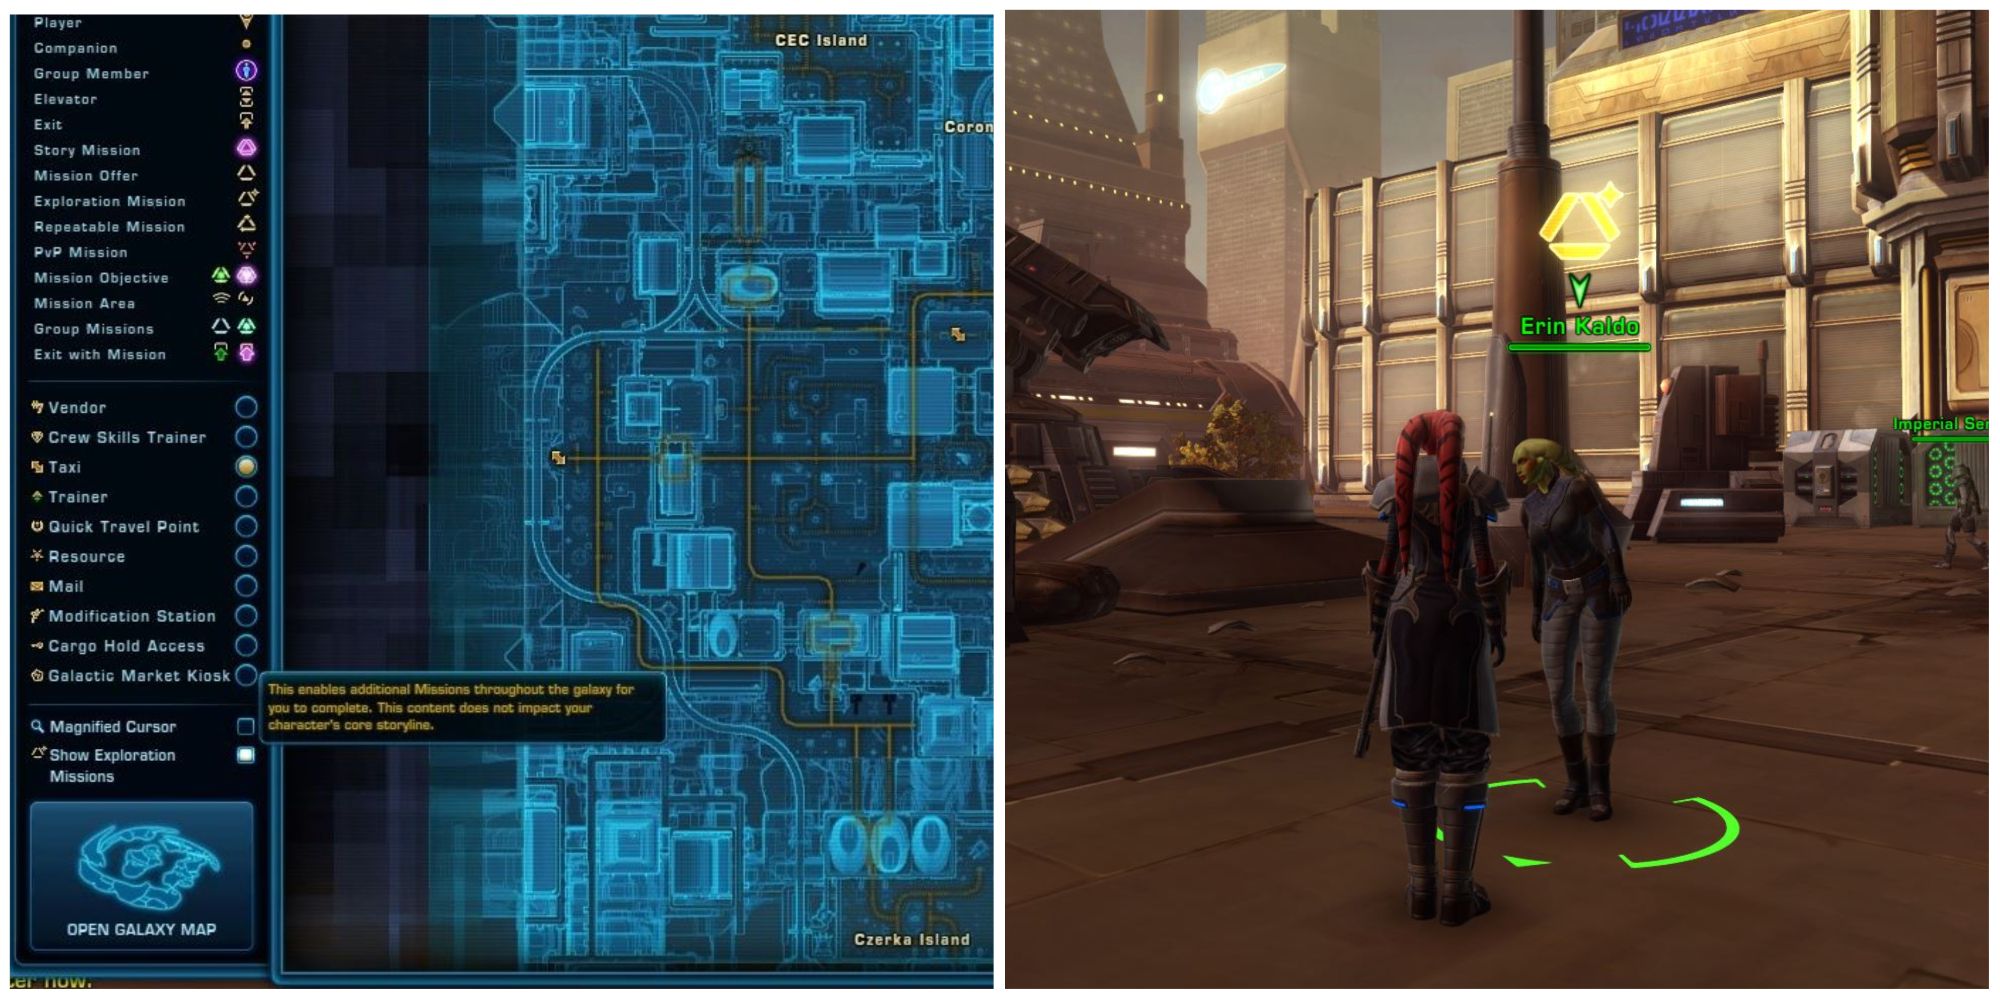 SWTOR exploration missions check box and a character picking up a side quest